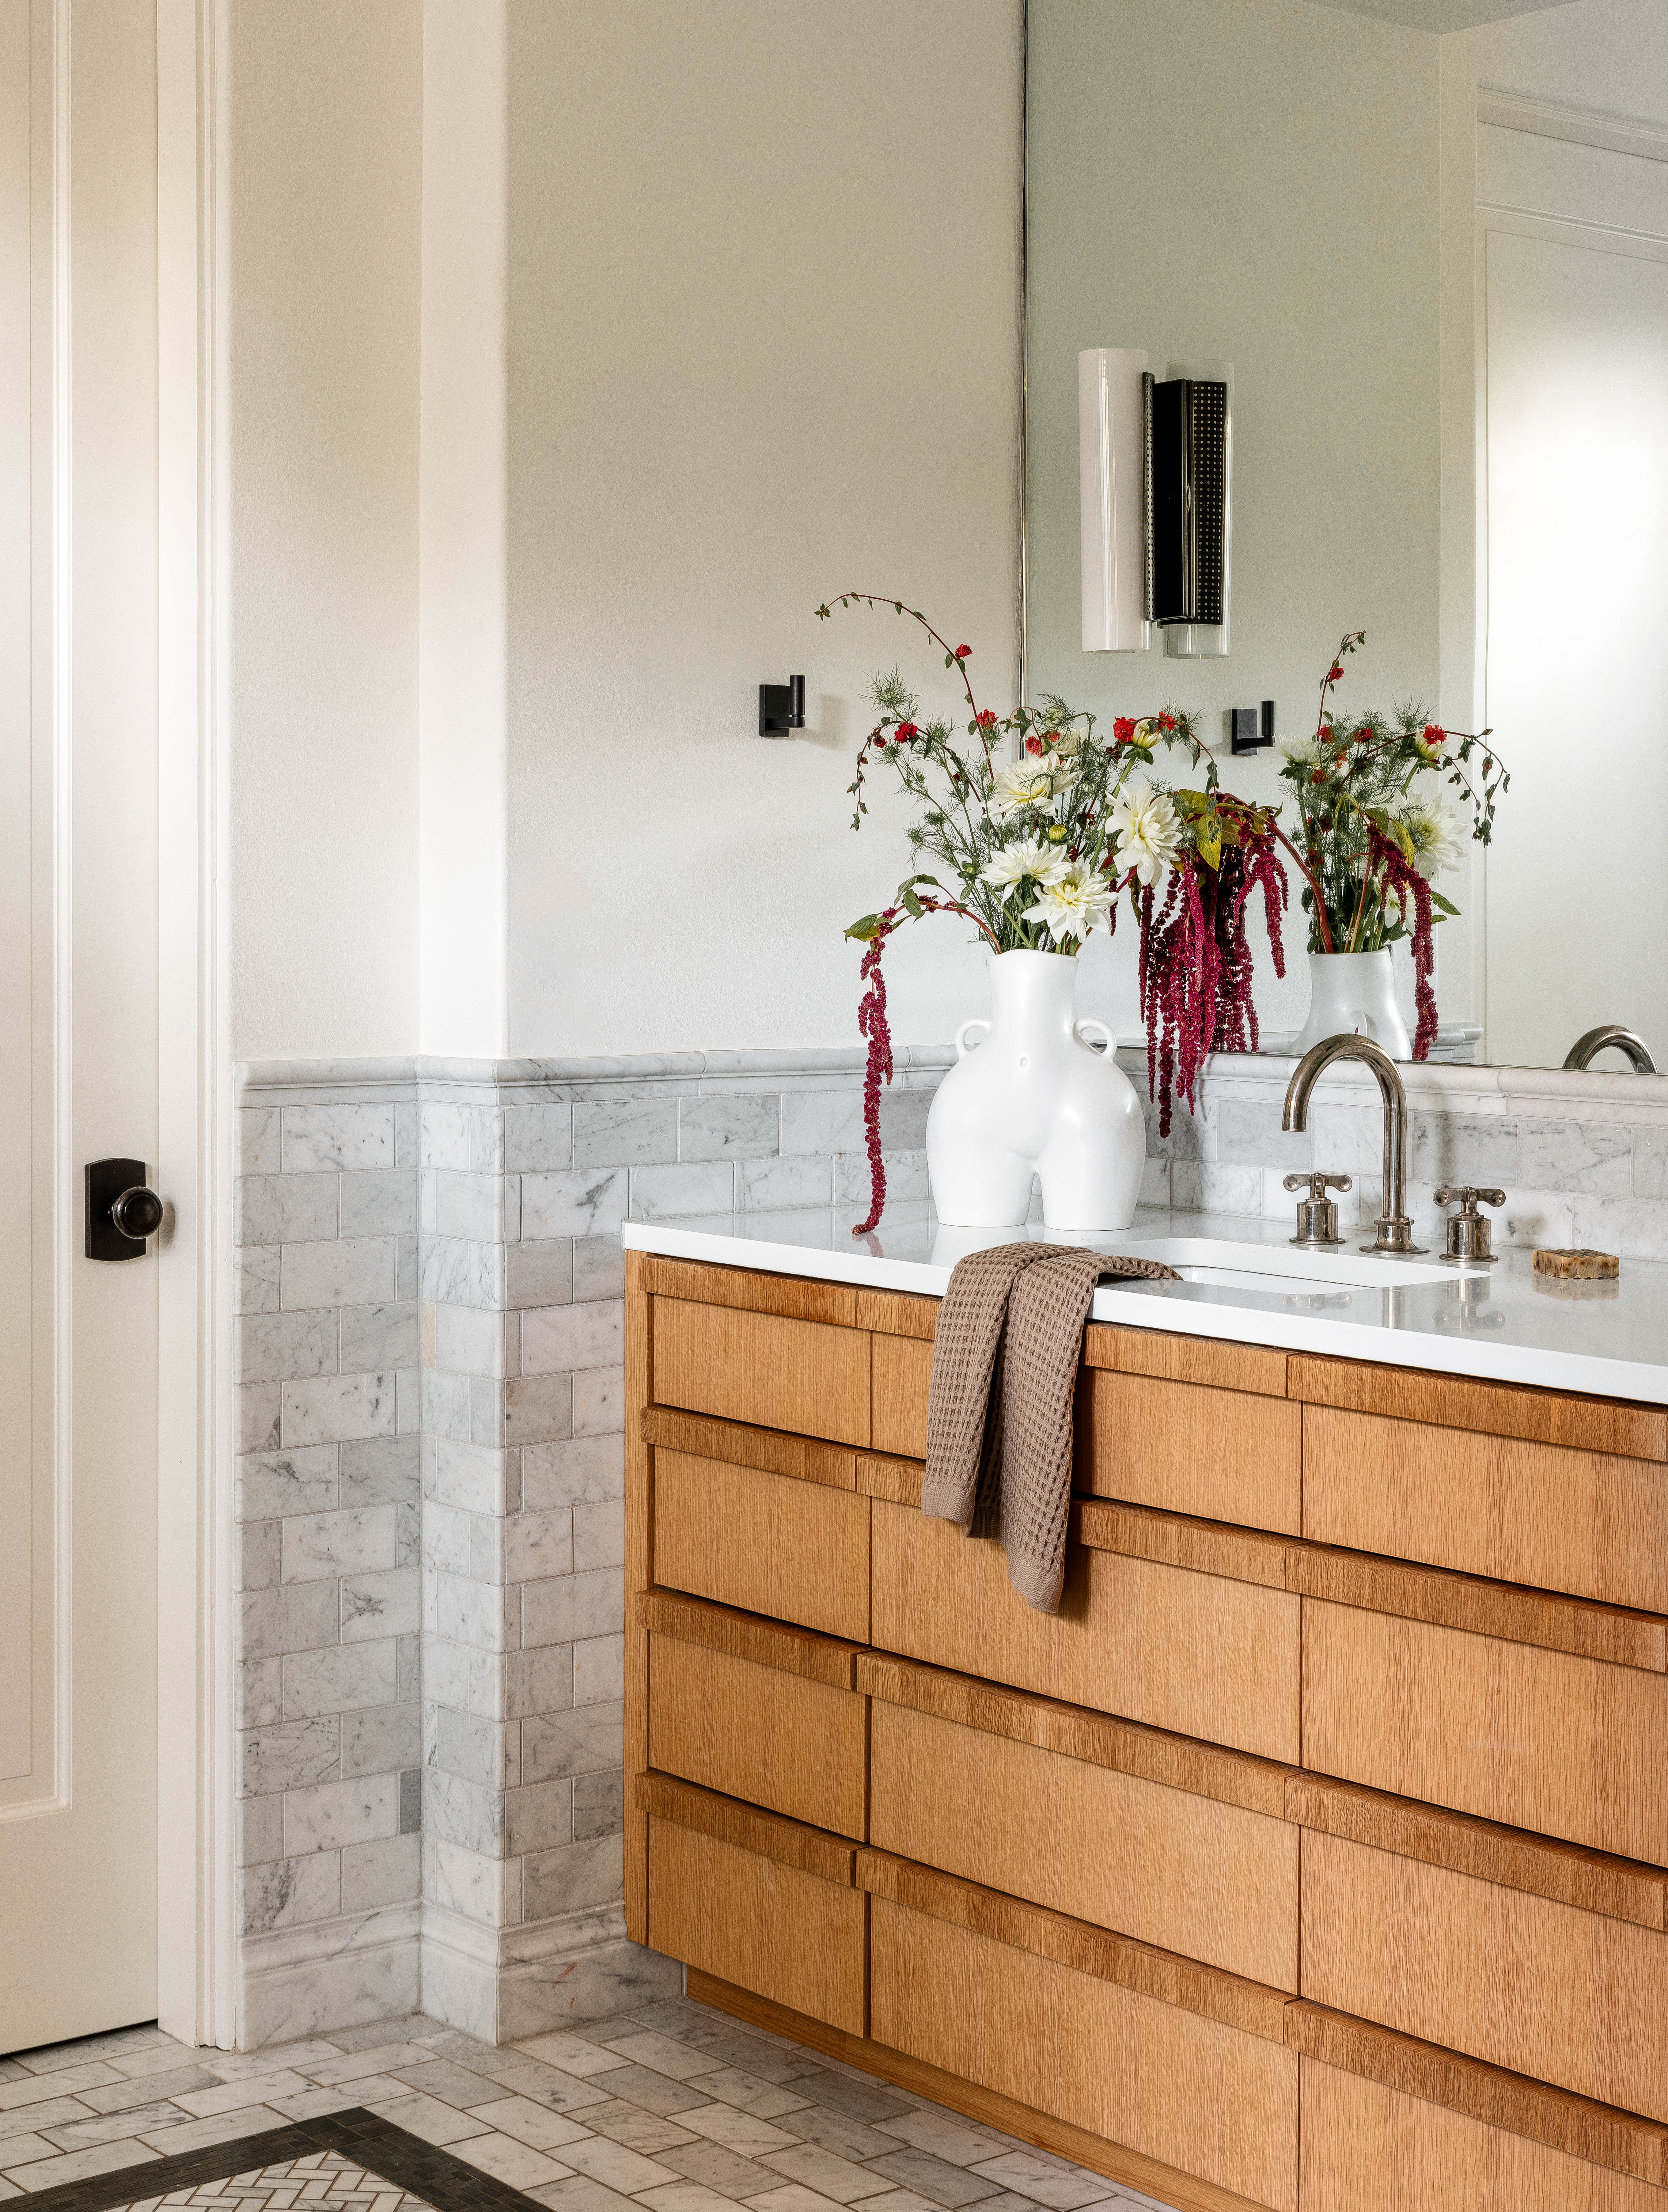 The Vanity received a new Waterworks Faucet paired with Kelly Wearstler Sconces.